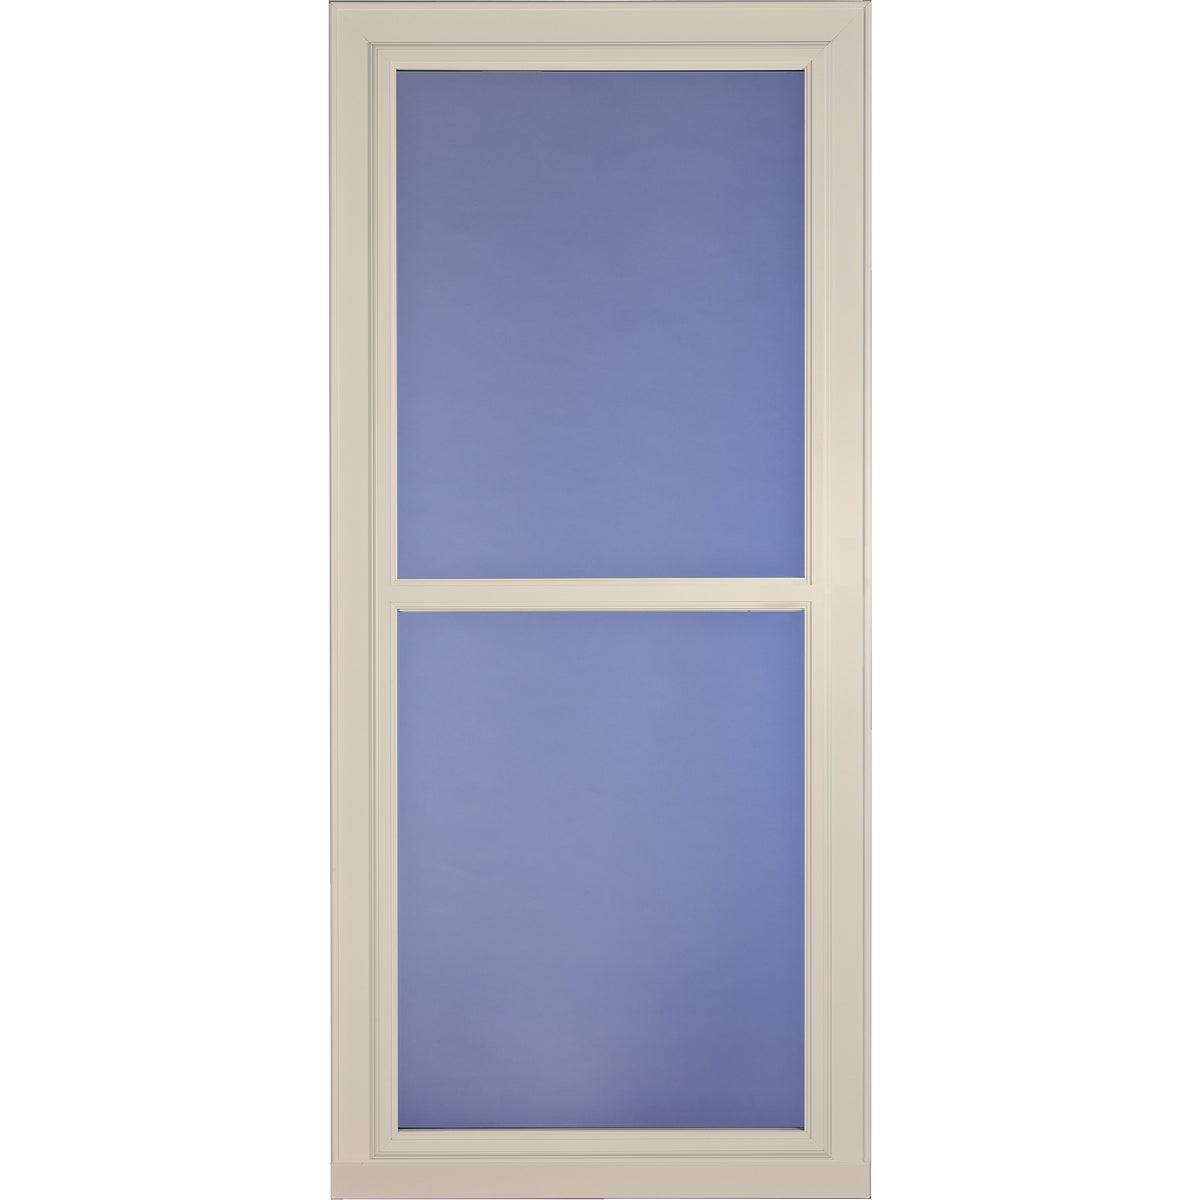 Larson Easy Vent 146 Series 36 In. W x 81 In. H x 1-7/8 In. Thick Almond Full View Aluminum Storm Door